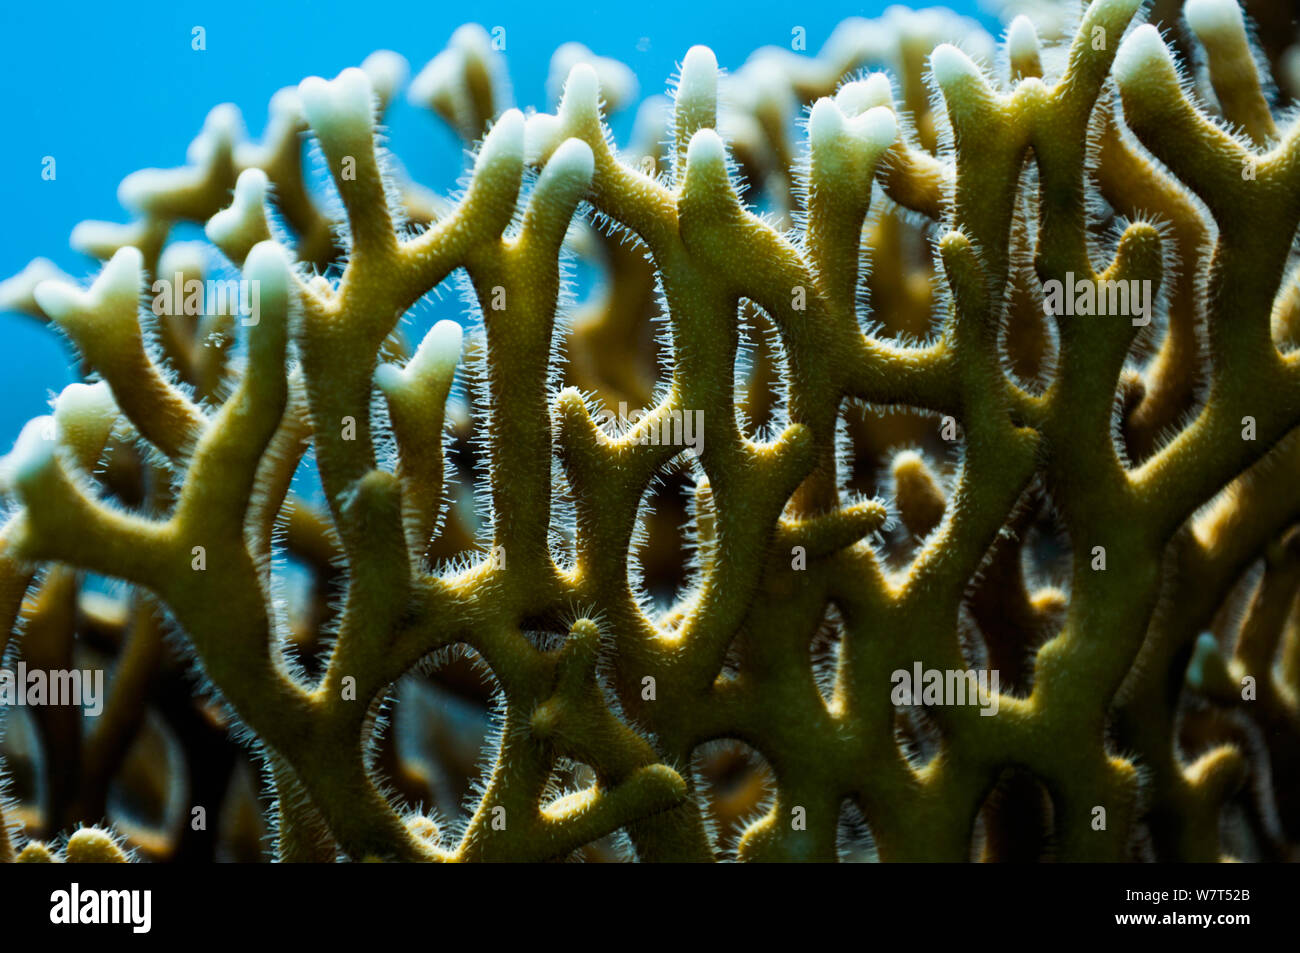 Fire coral (Millepora dichotoma) a hydroid, showing the hairs that are covered in cells called nematocysts, used mainly as a defense mechanism against fish which may feed upon it as well as against prey for food. Egypt, Red Sea. Stock Photo